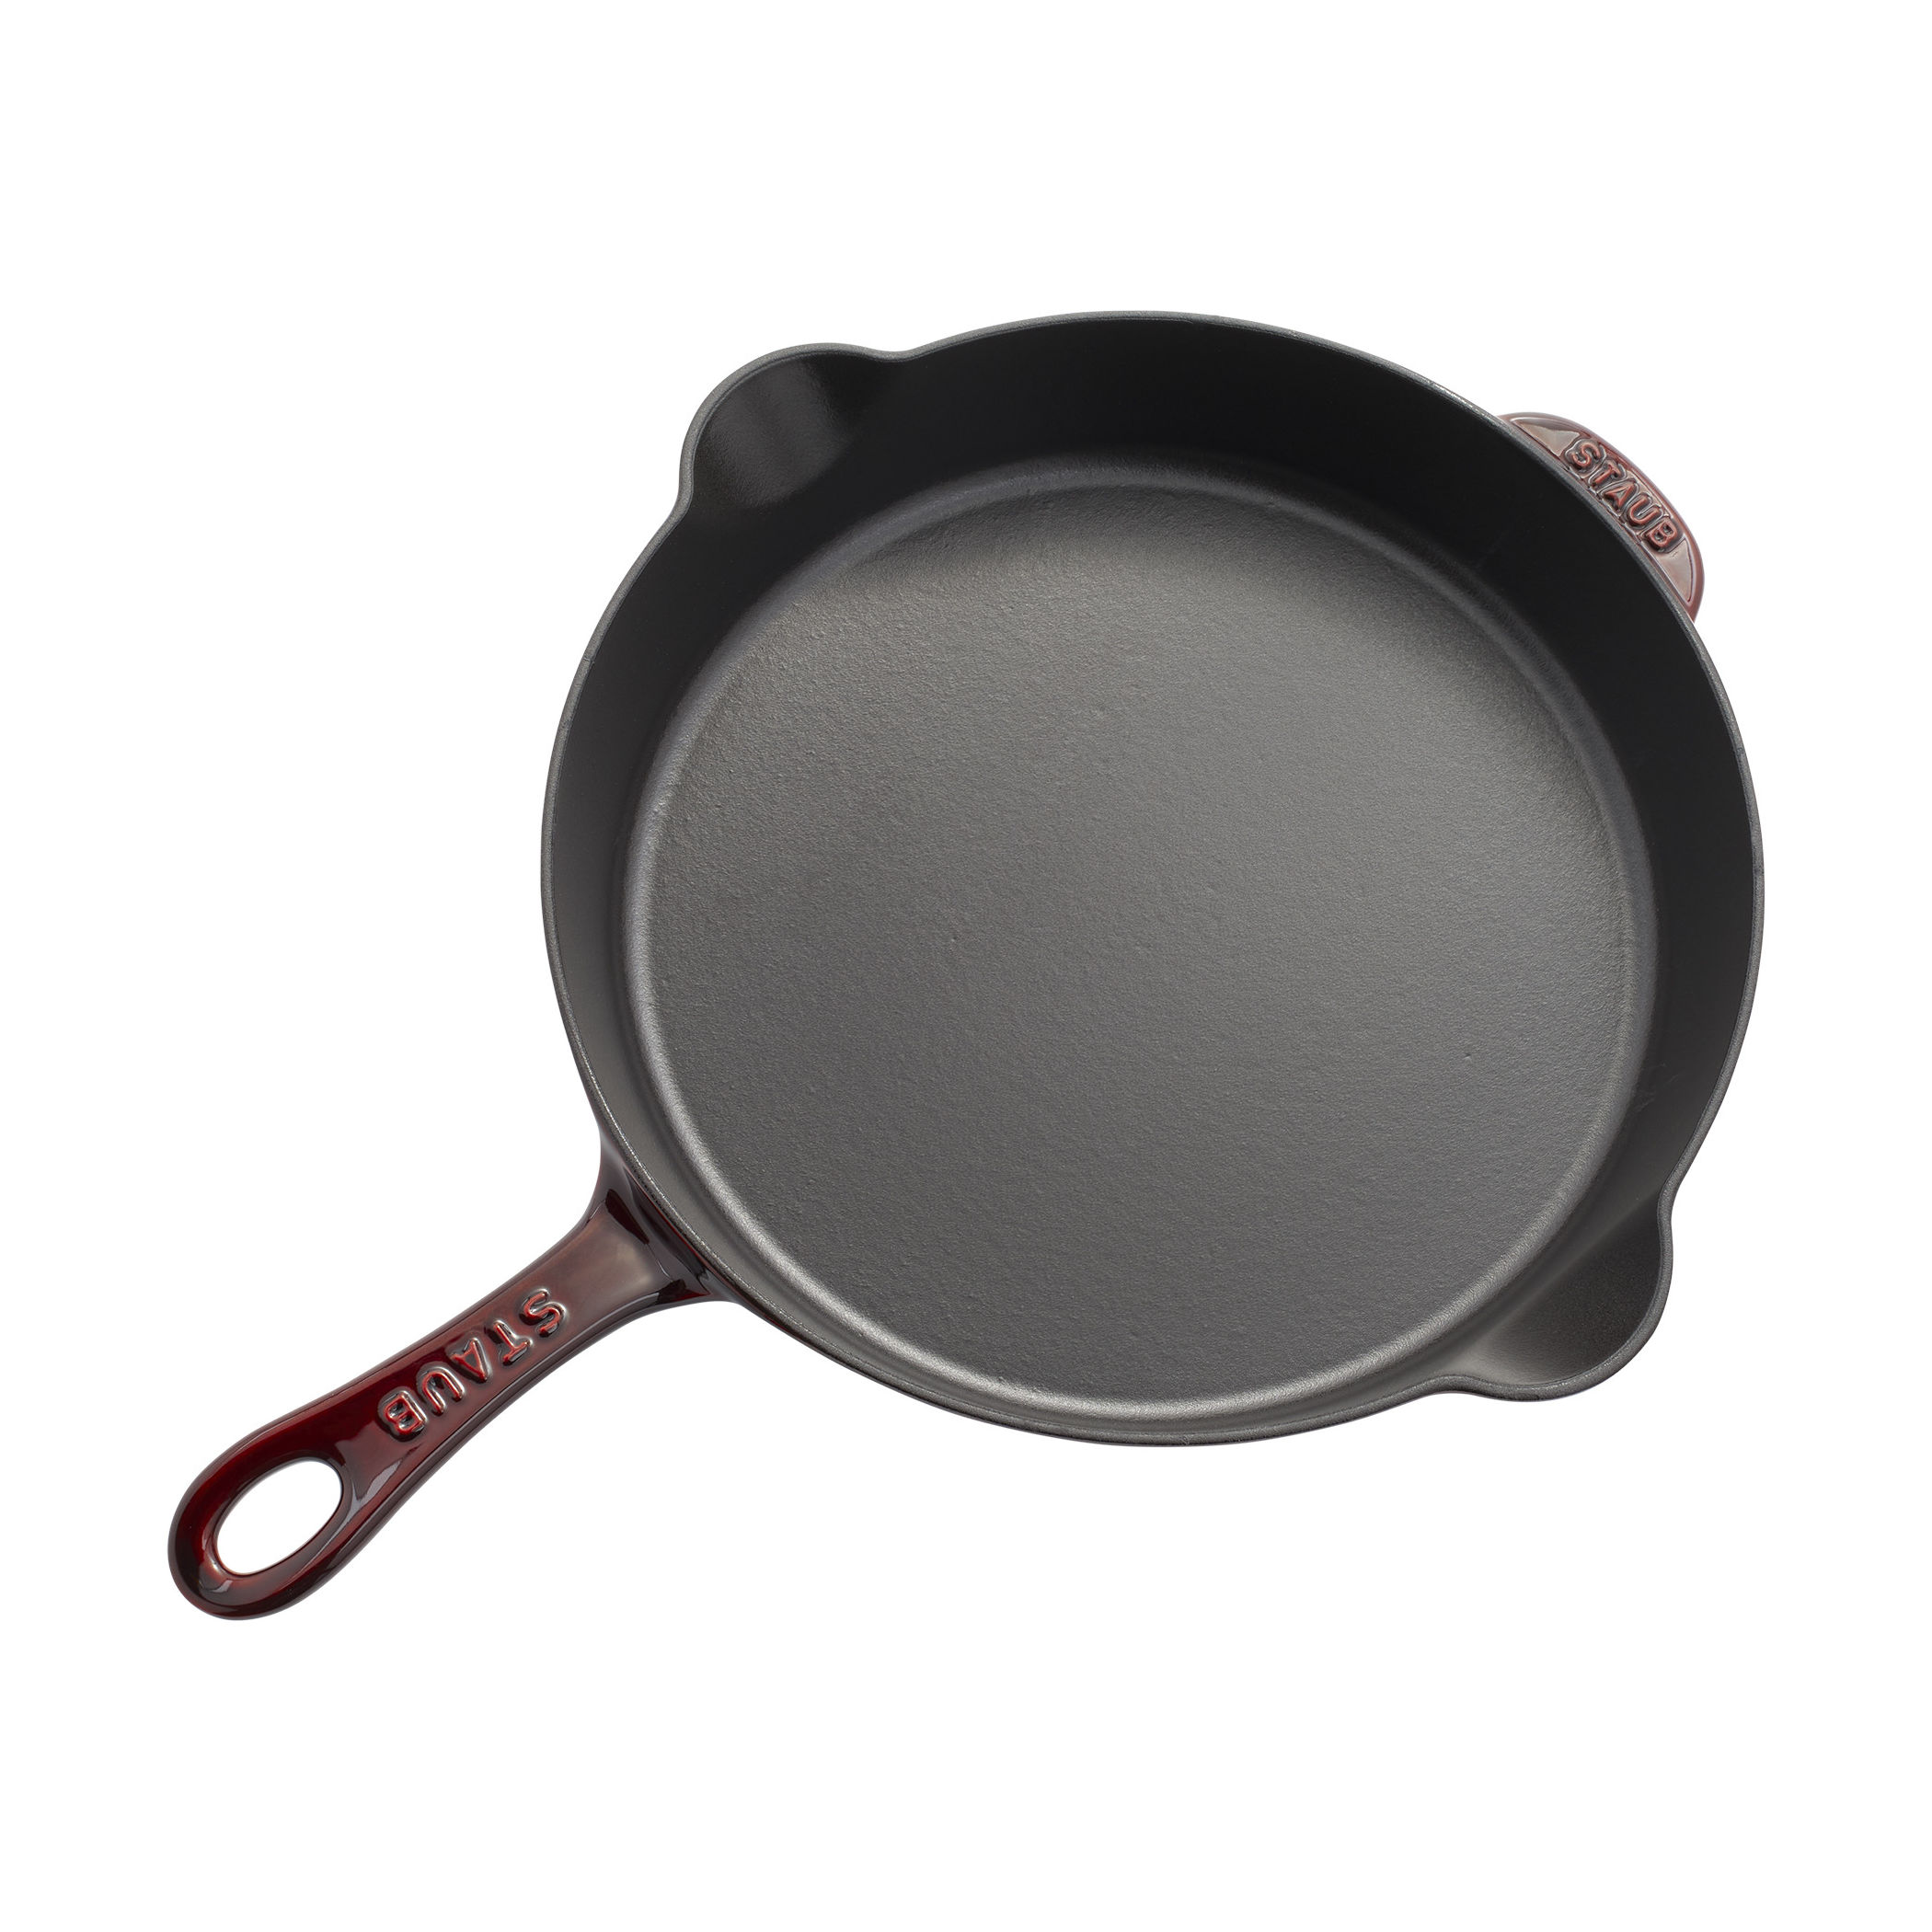 Staub Cast Iron 11in Traditional Skillet - Grenadine Made in France